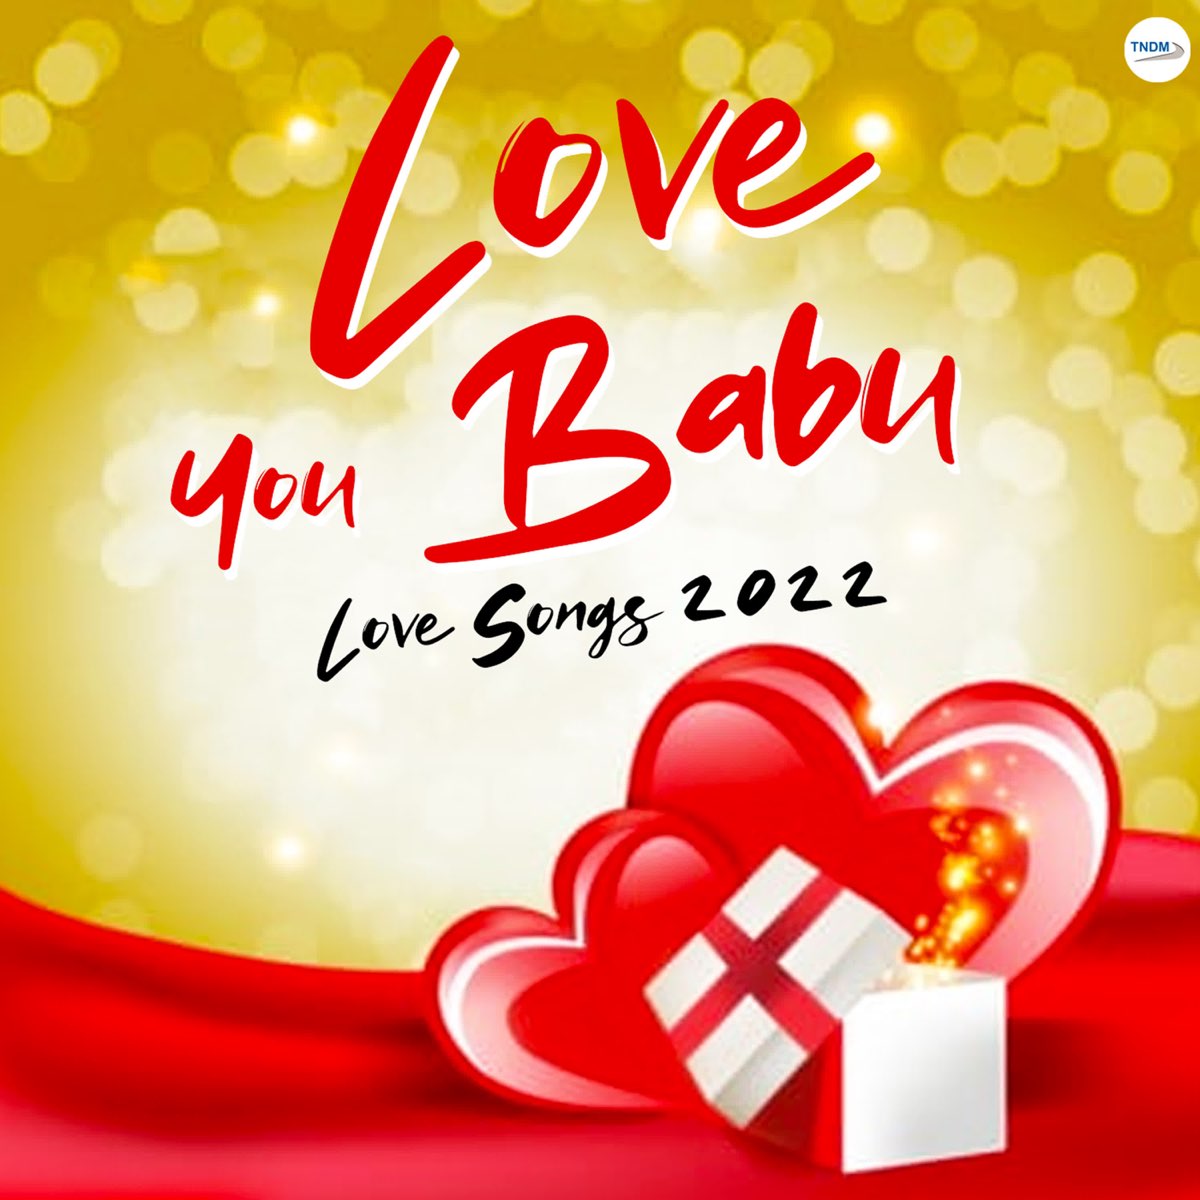 Love You Babu - Love Songs 2022 by Various Artists on Apple Music